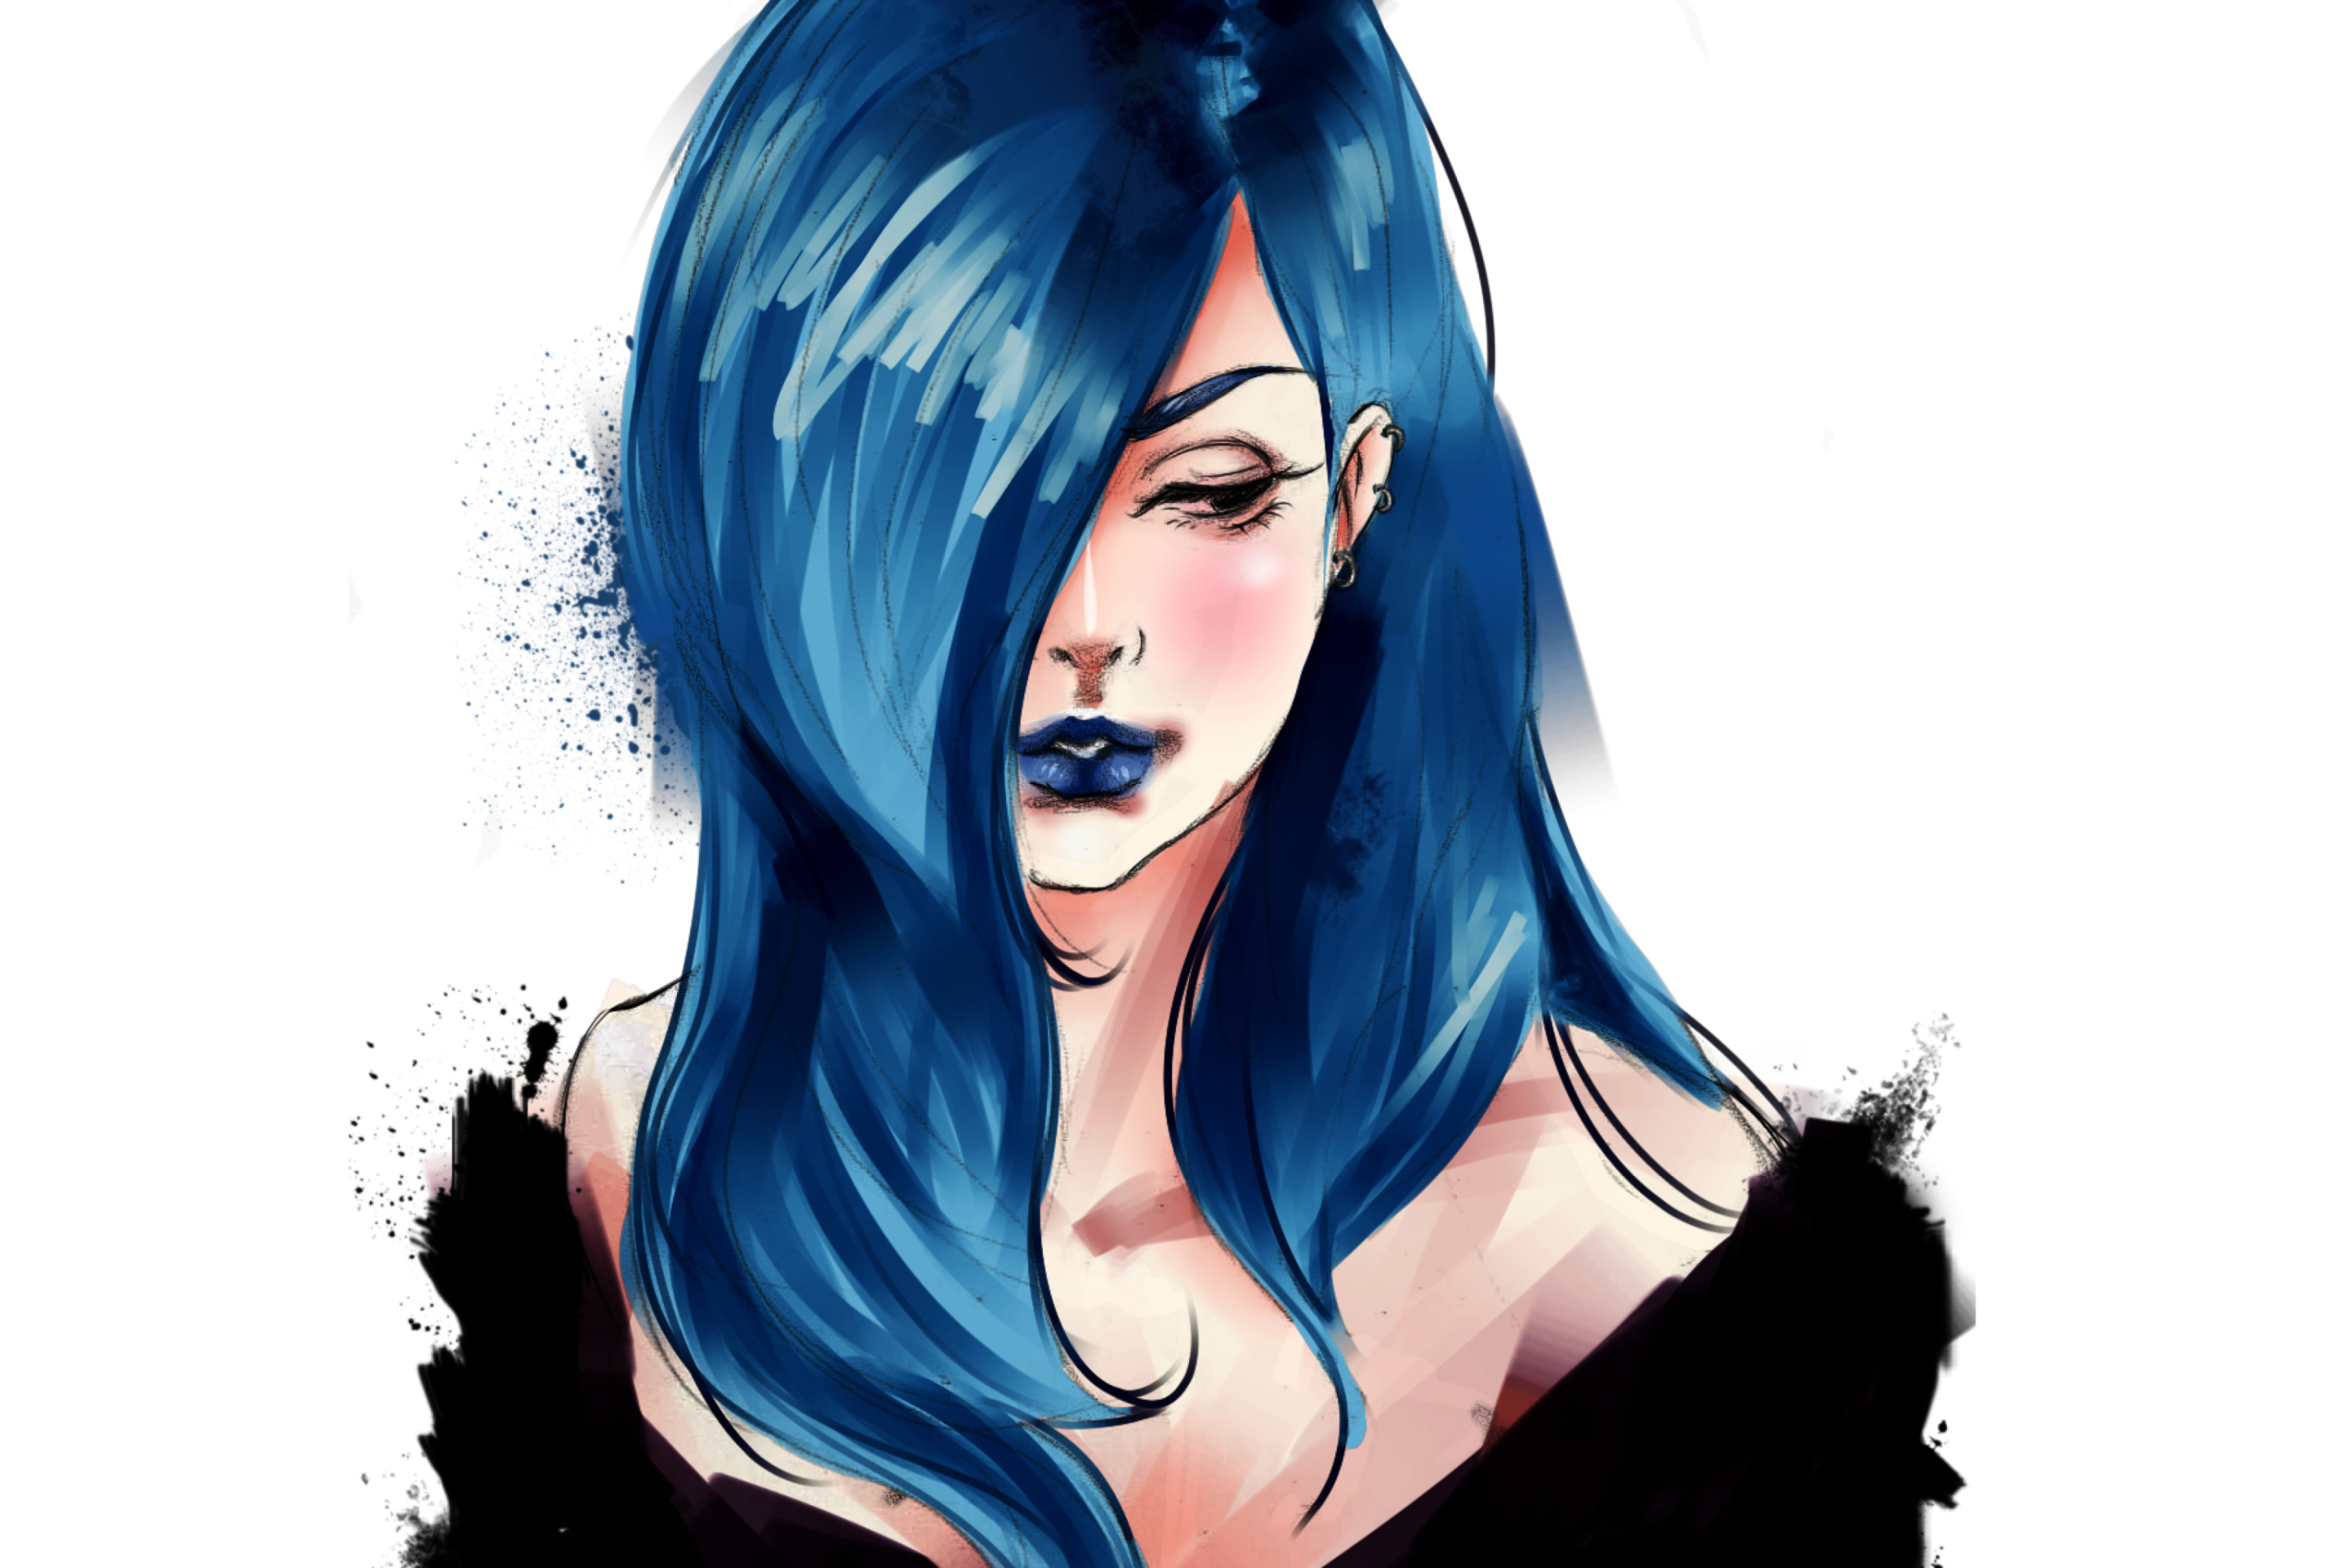 Das Girl With Blue Hair Painting Wallpaper 2880x1920